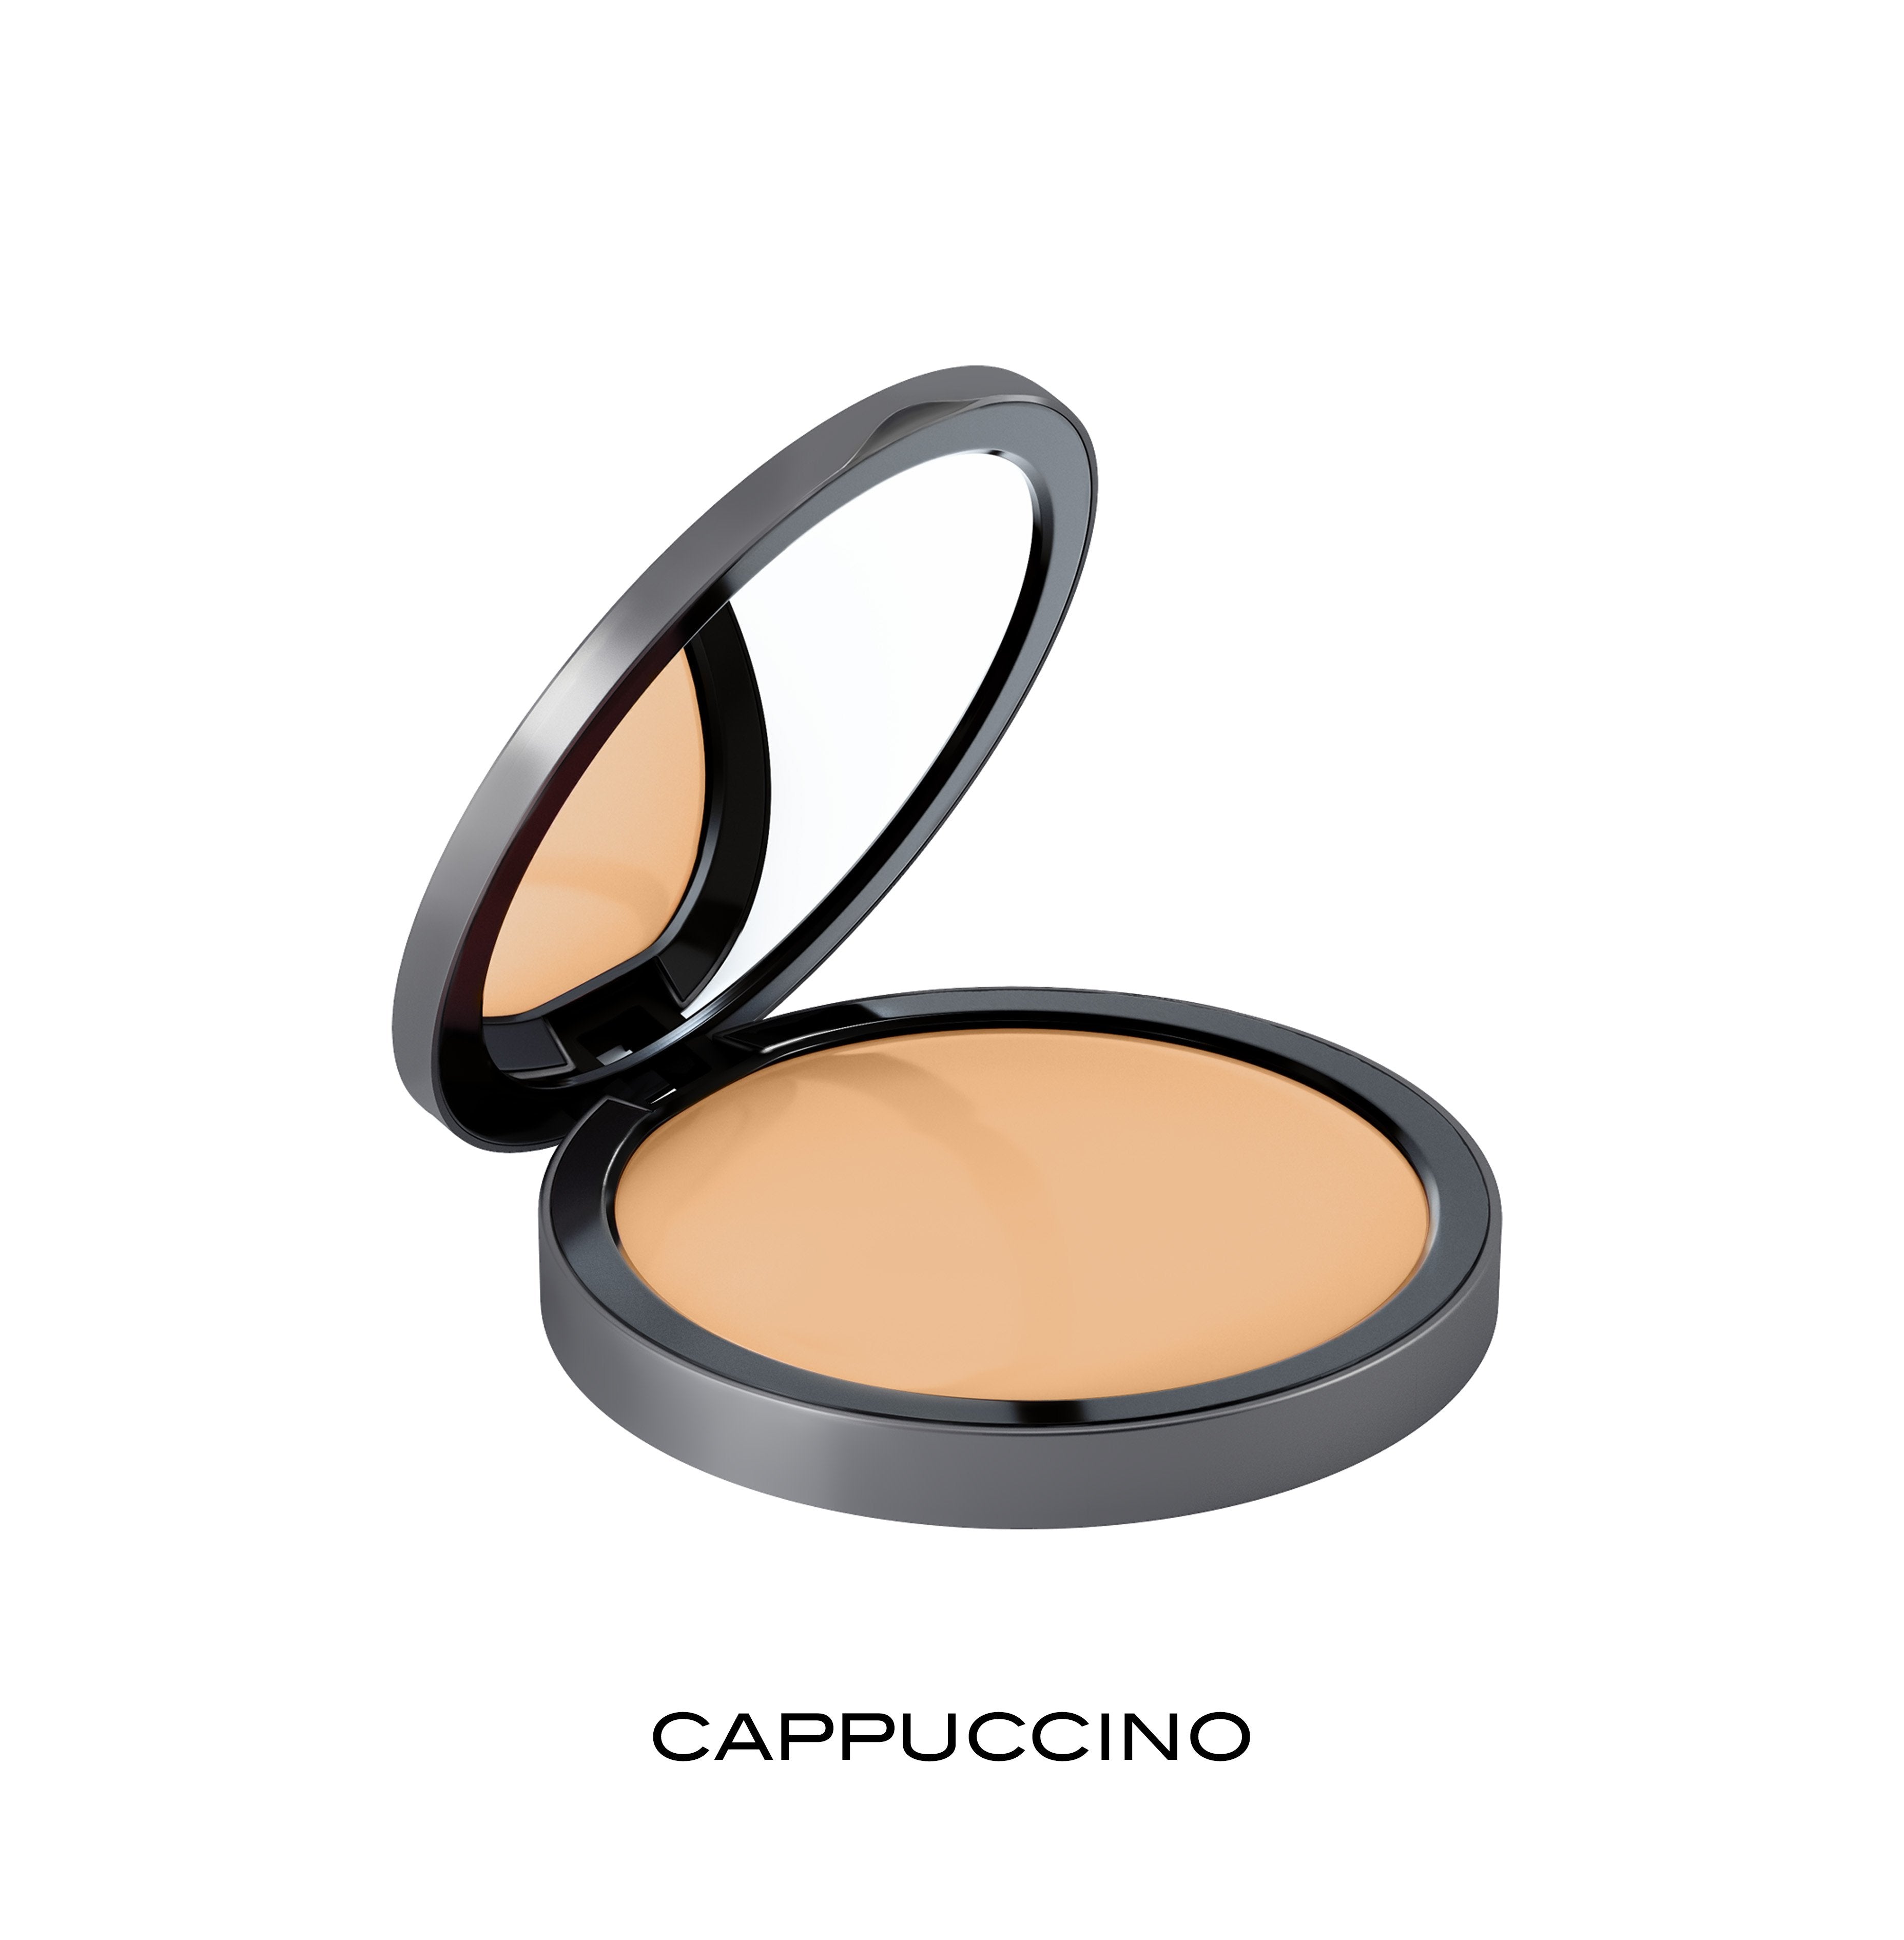 Synergie Skin Mineral Whip Foundation in Capuccino | skintoheart